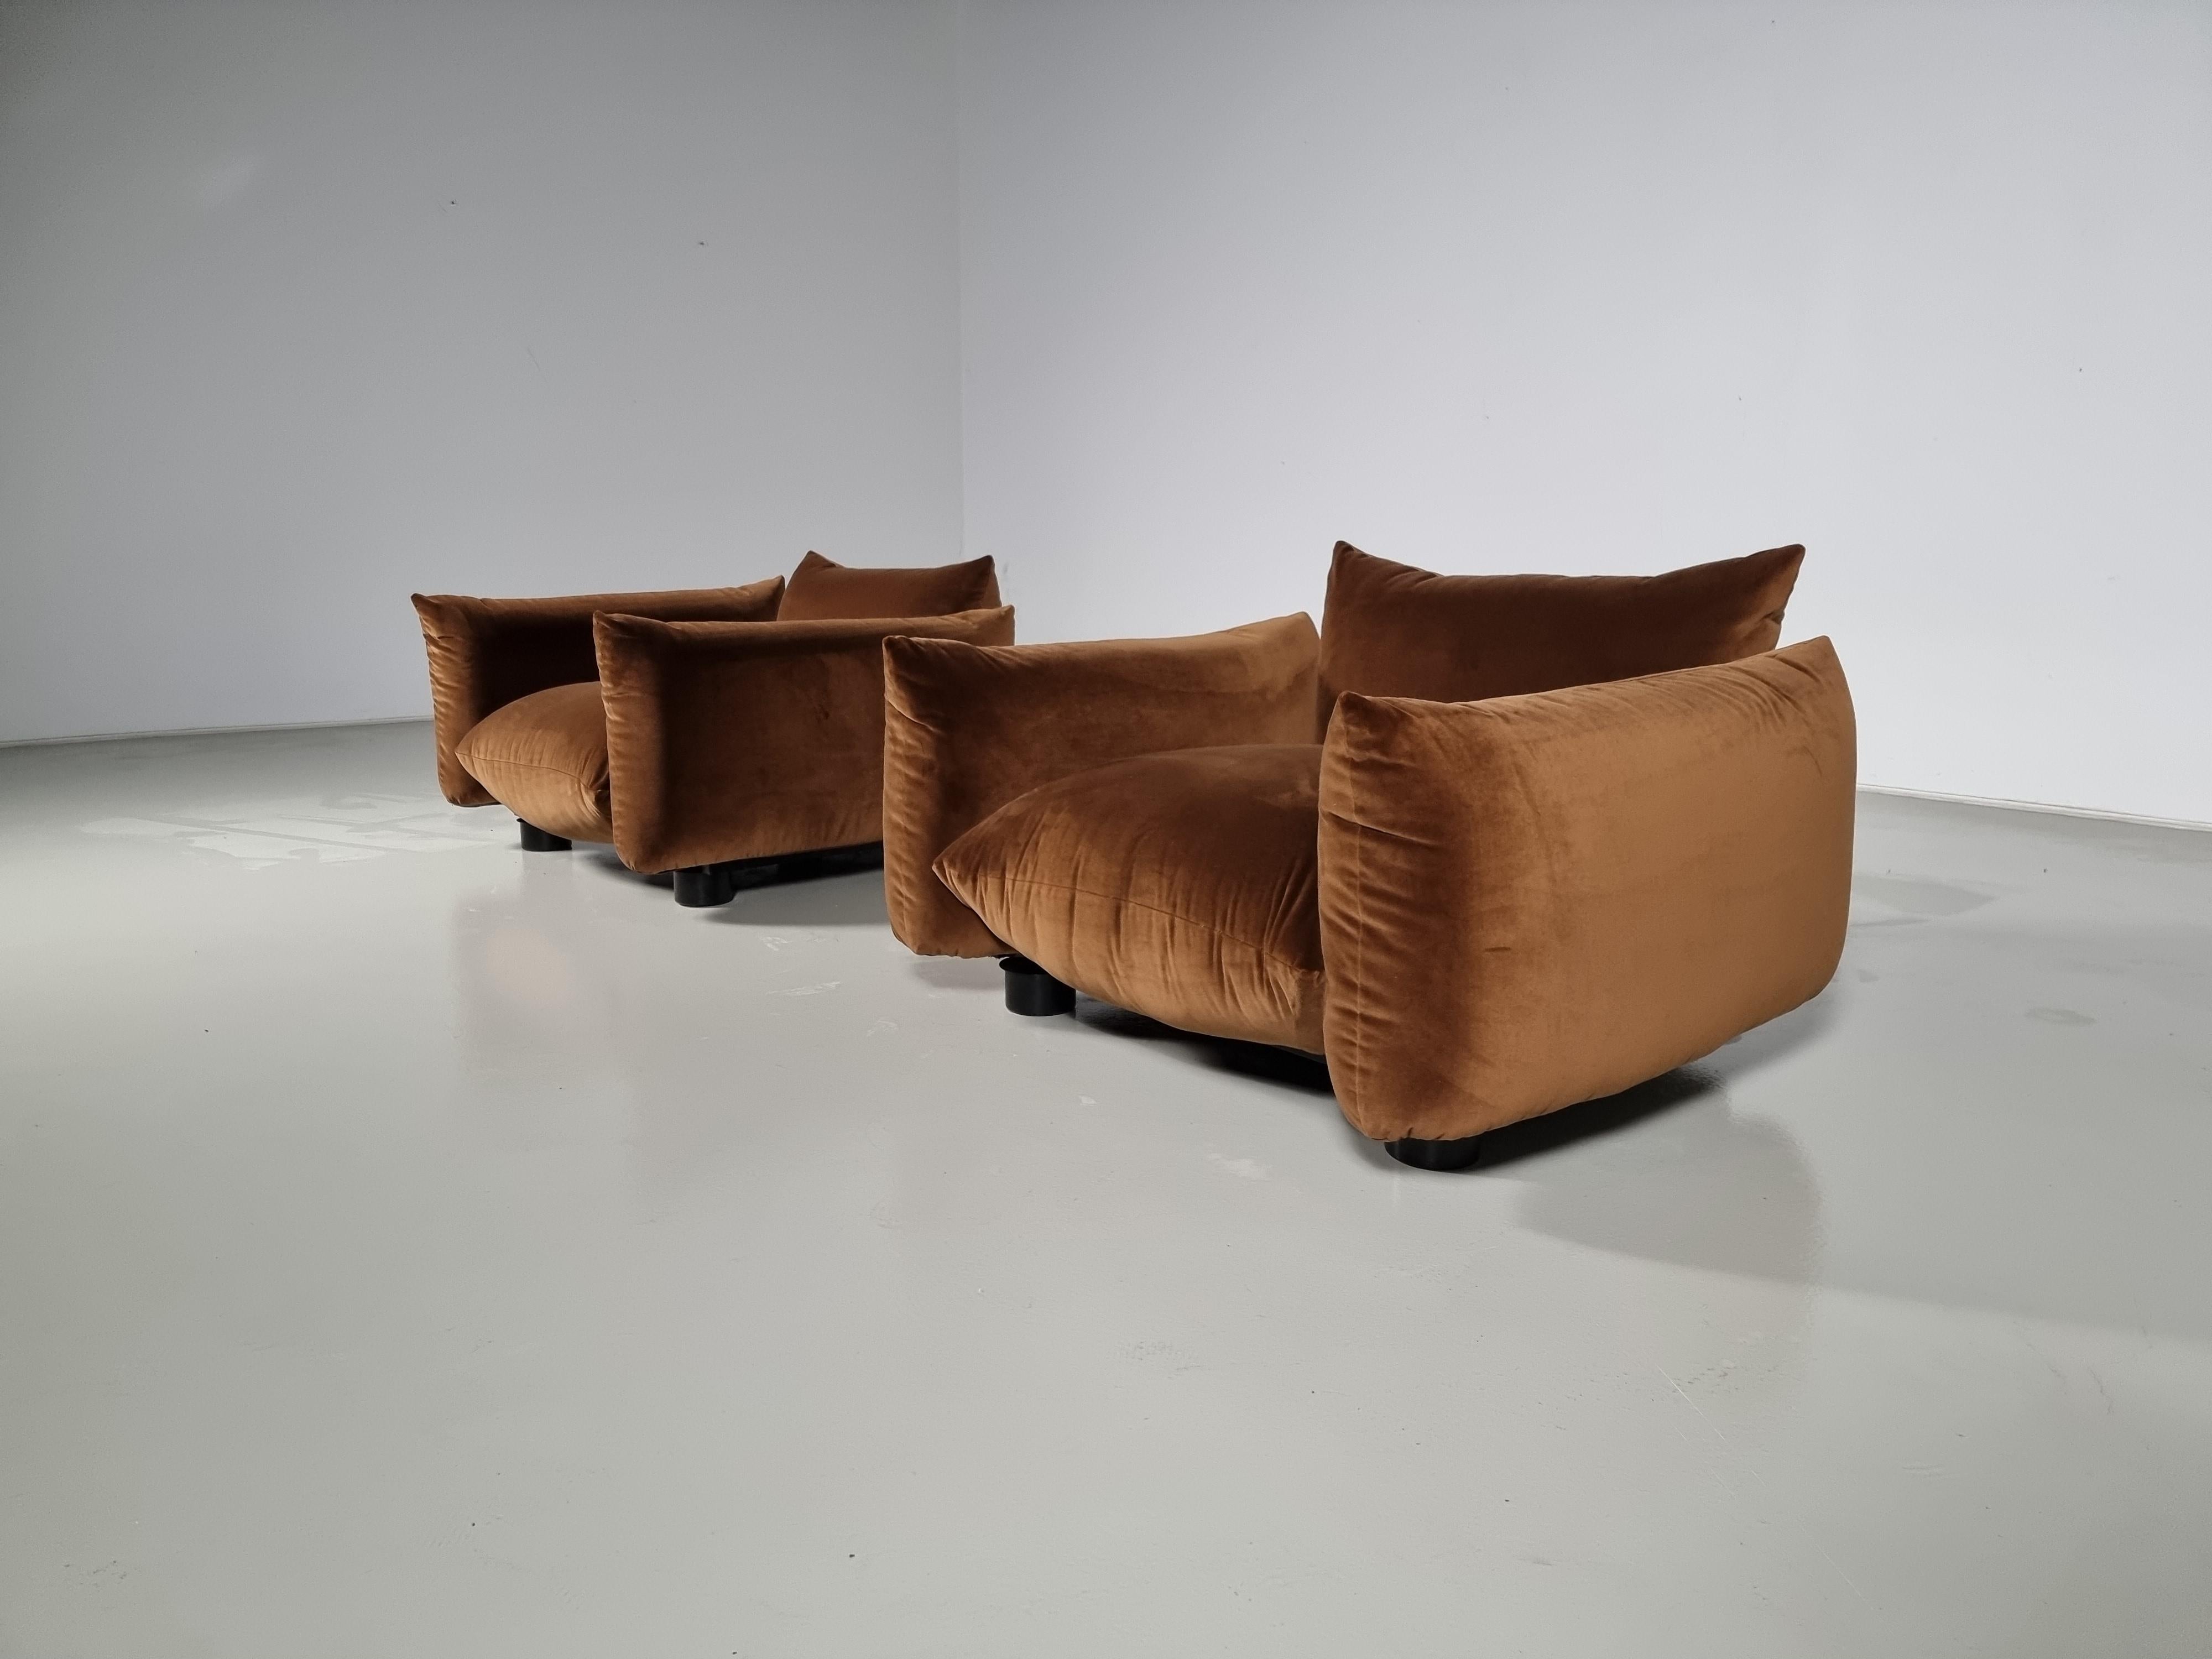 Mario Marenco for Arflex, 'Marenco' lounge chairs, velvet, Italy, 1970

These Marenco chairs were designed by Mario Marenco for Arflex. This sofa features a system with making the armrest and seats the base portion. There is a metal tubular frame